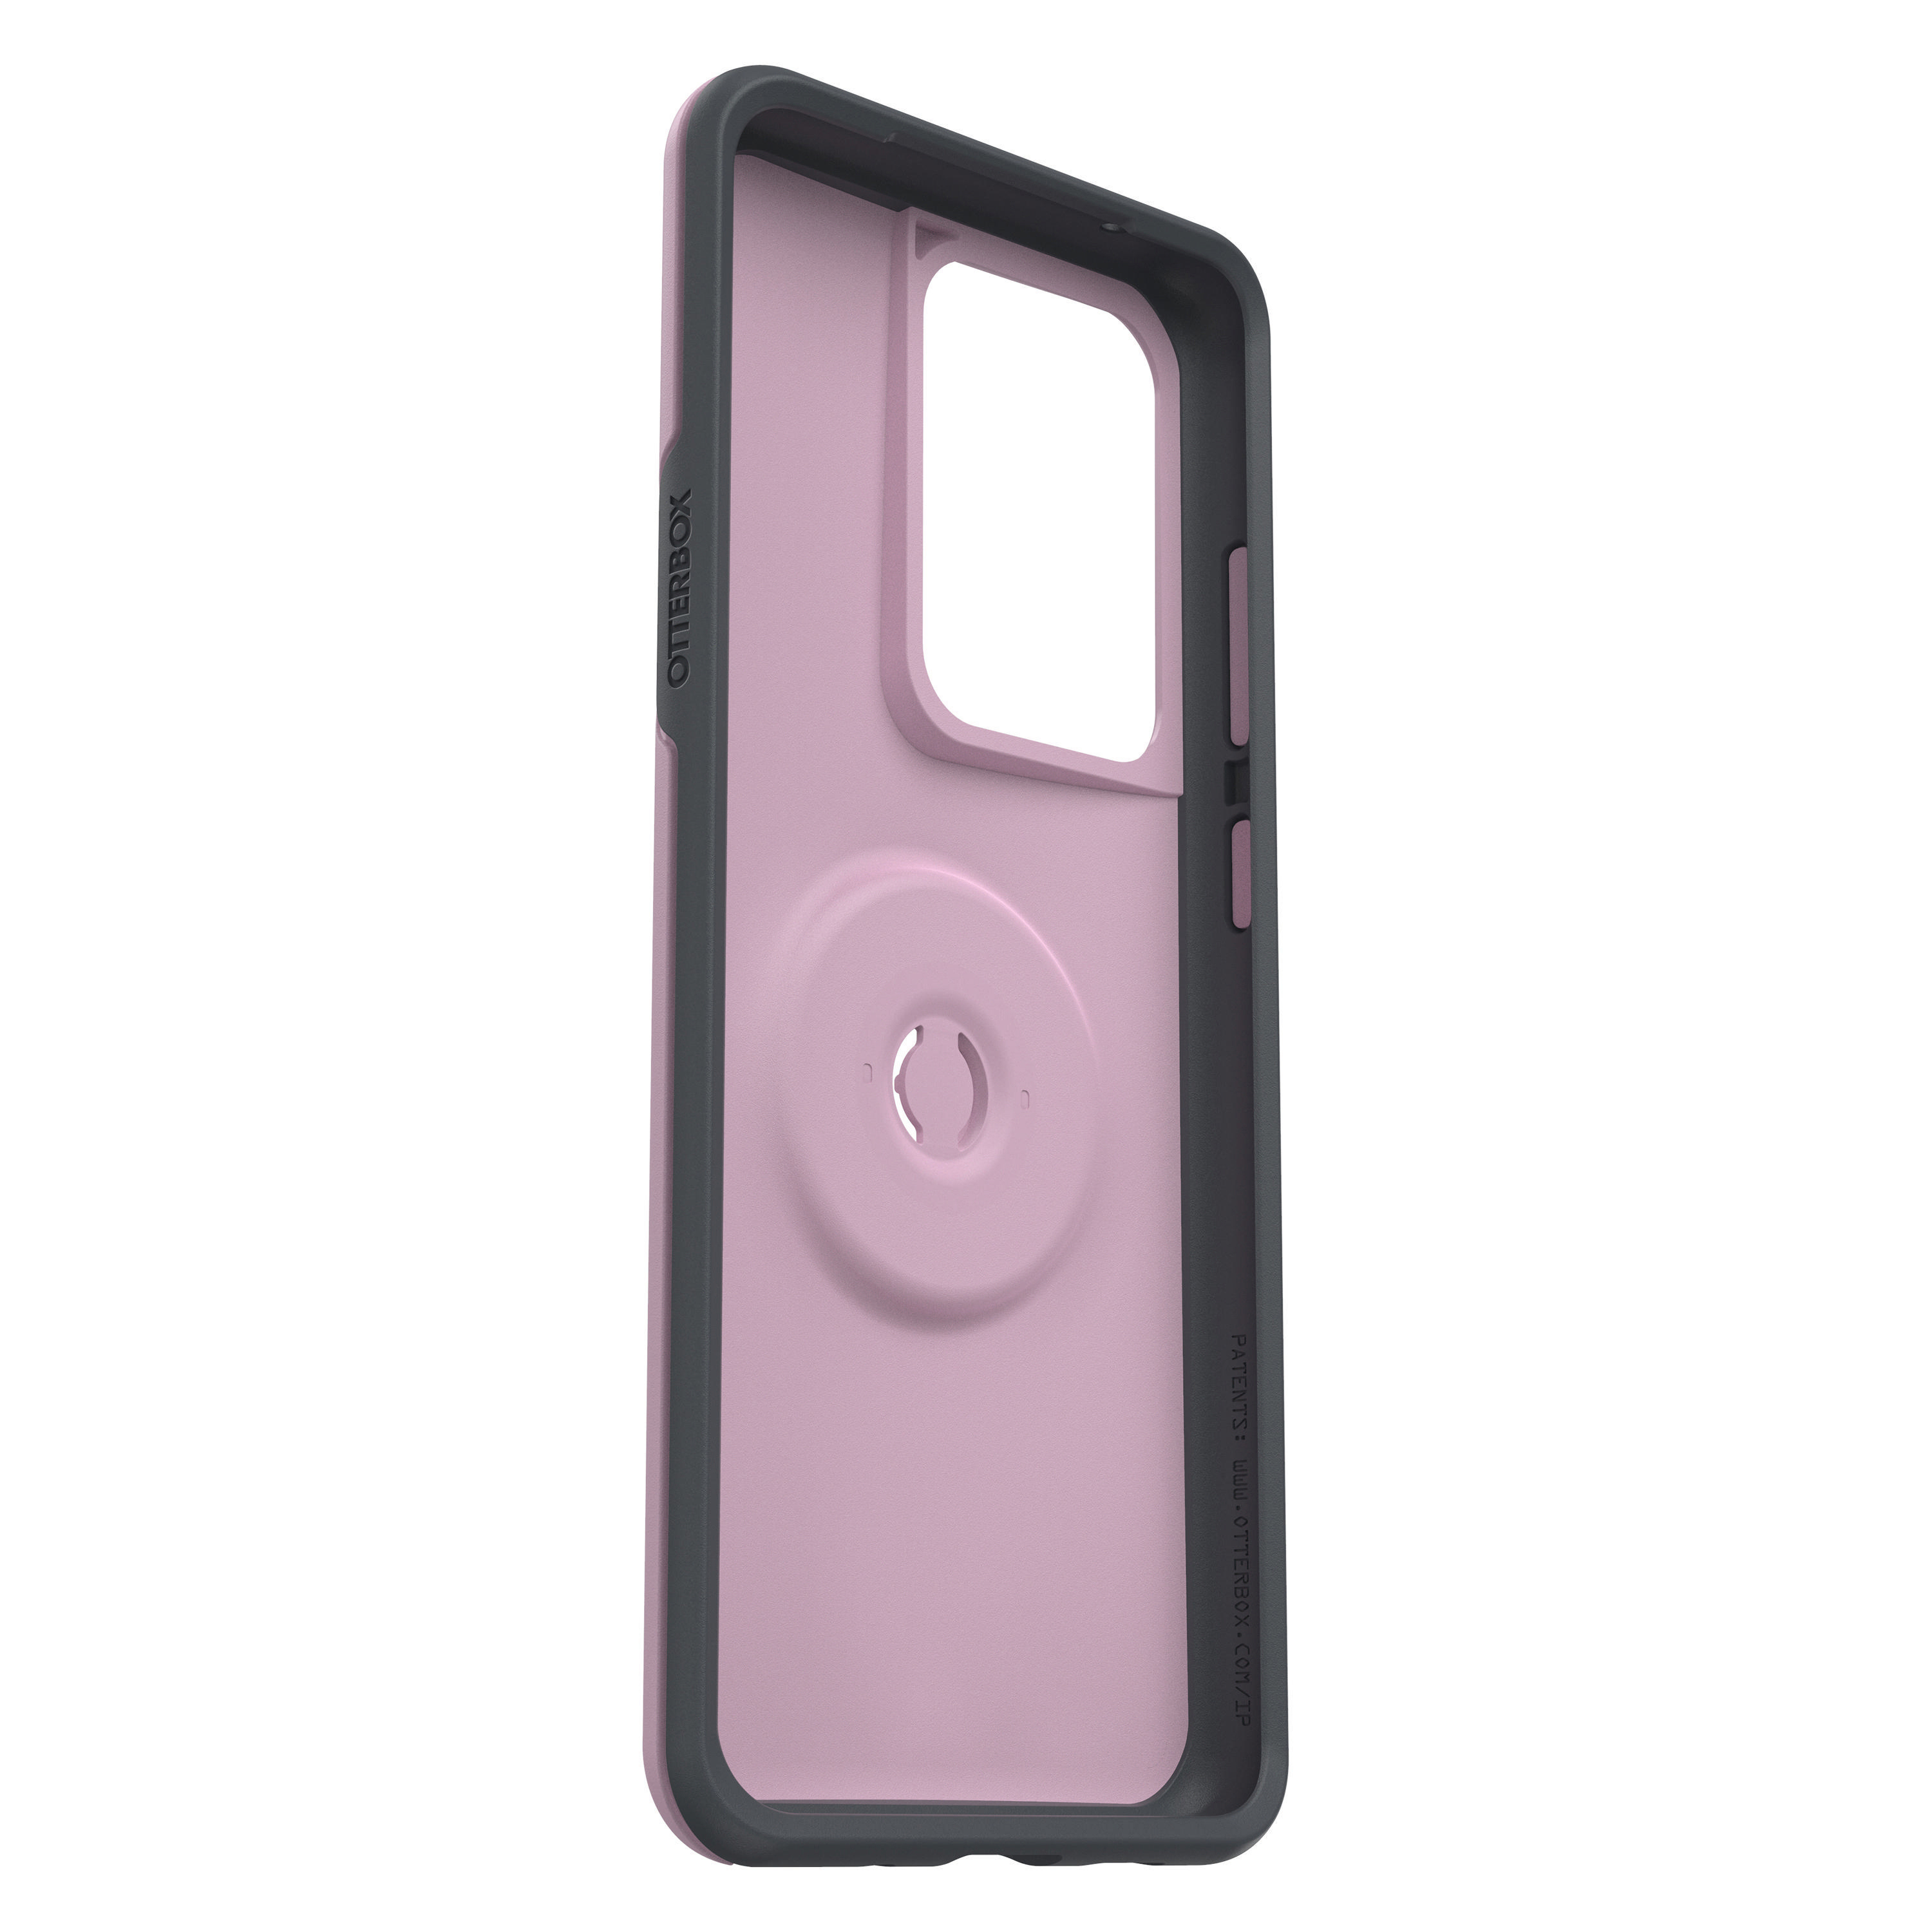 OTTERBOX Backcover, 77-64239, S20 Pink Ultra, Galaxy Samsung,